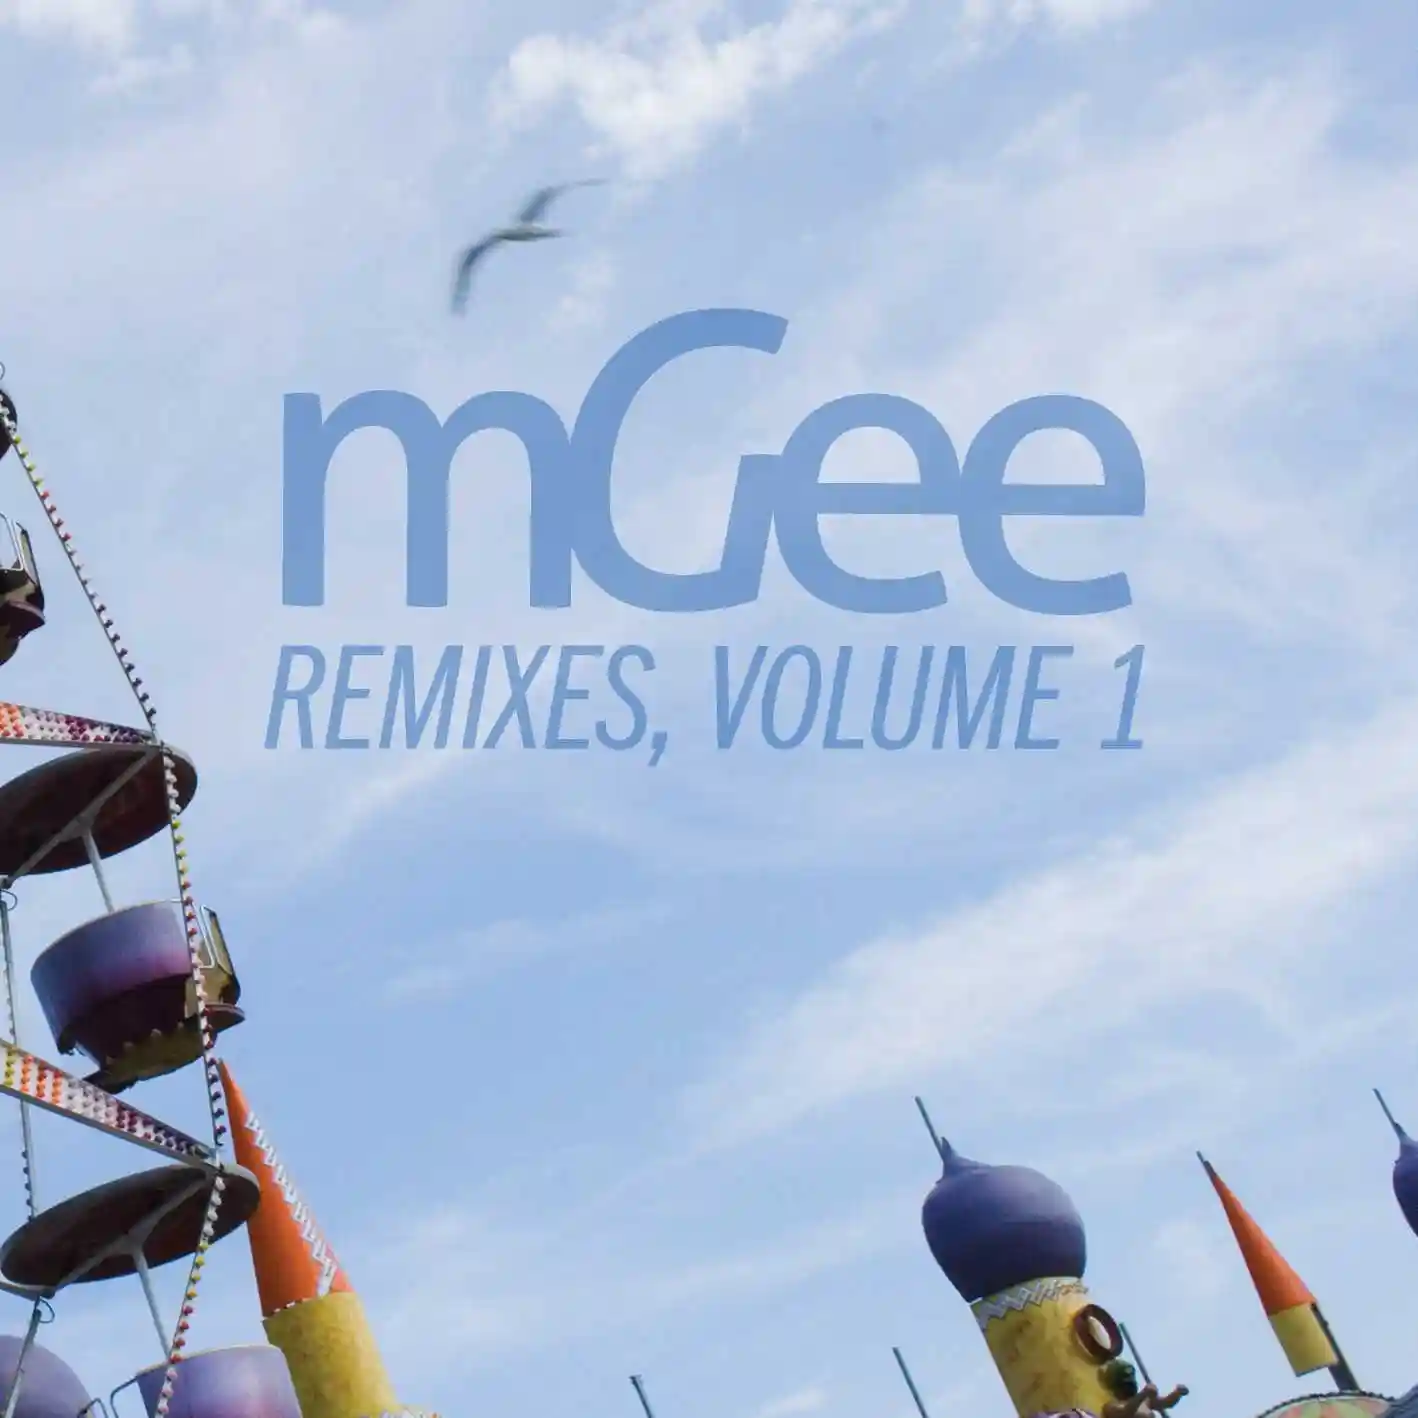 Album cover for “Remixes, Volume 1” by mGee